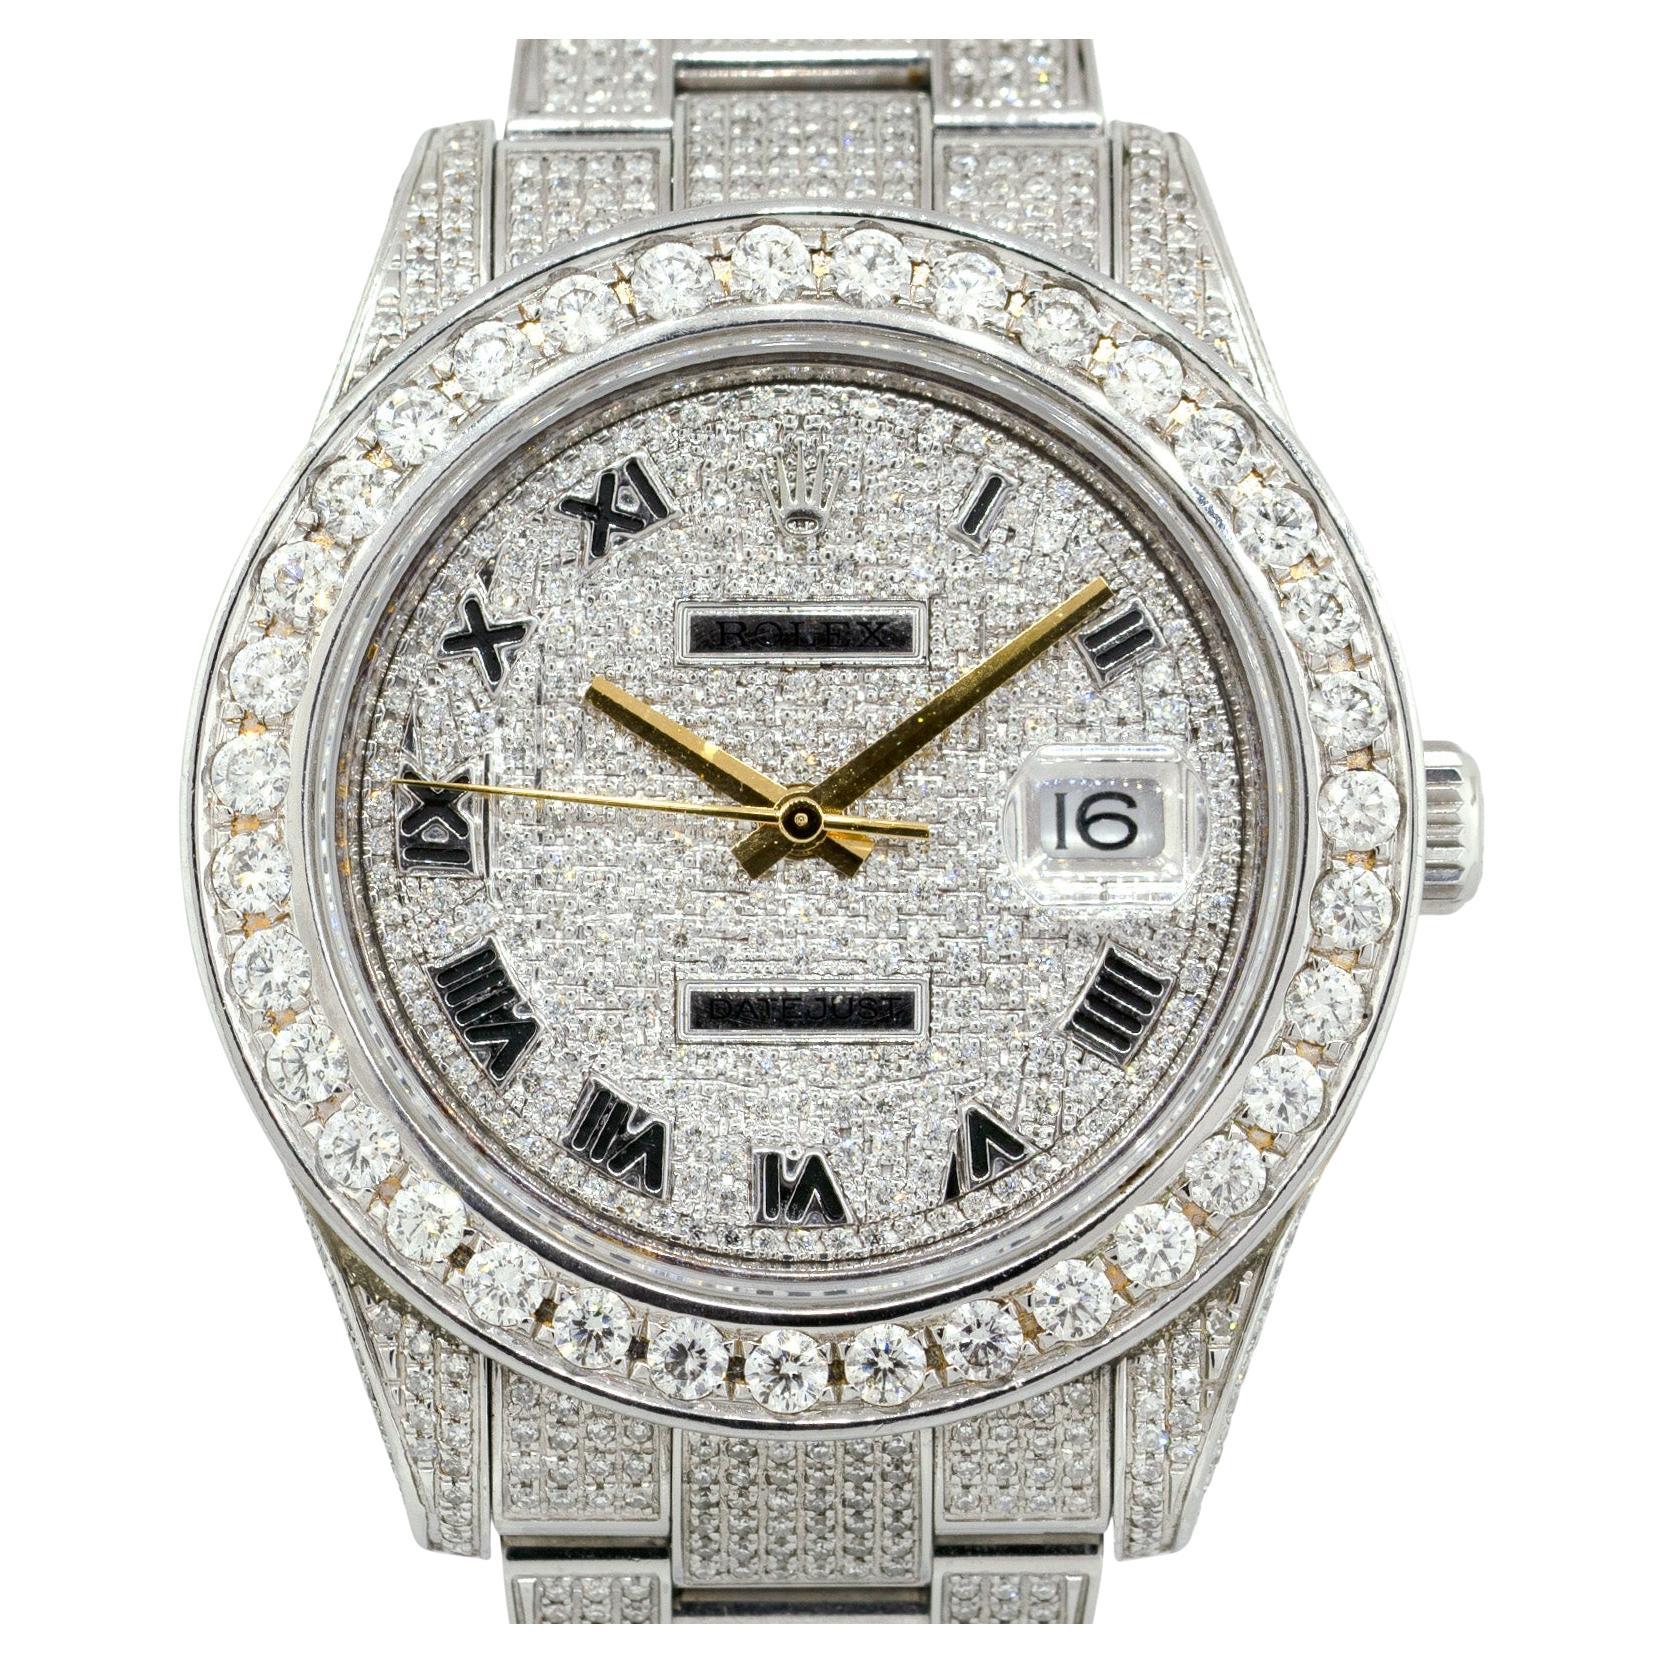 Rolex 116334 Datejust Stainless Steel All Diamond Pave Watch For Sale